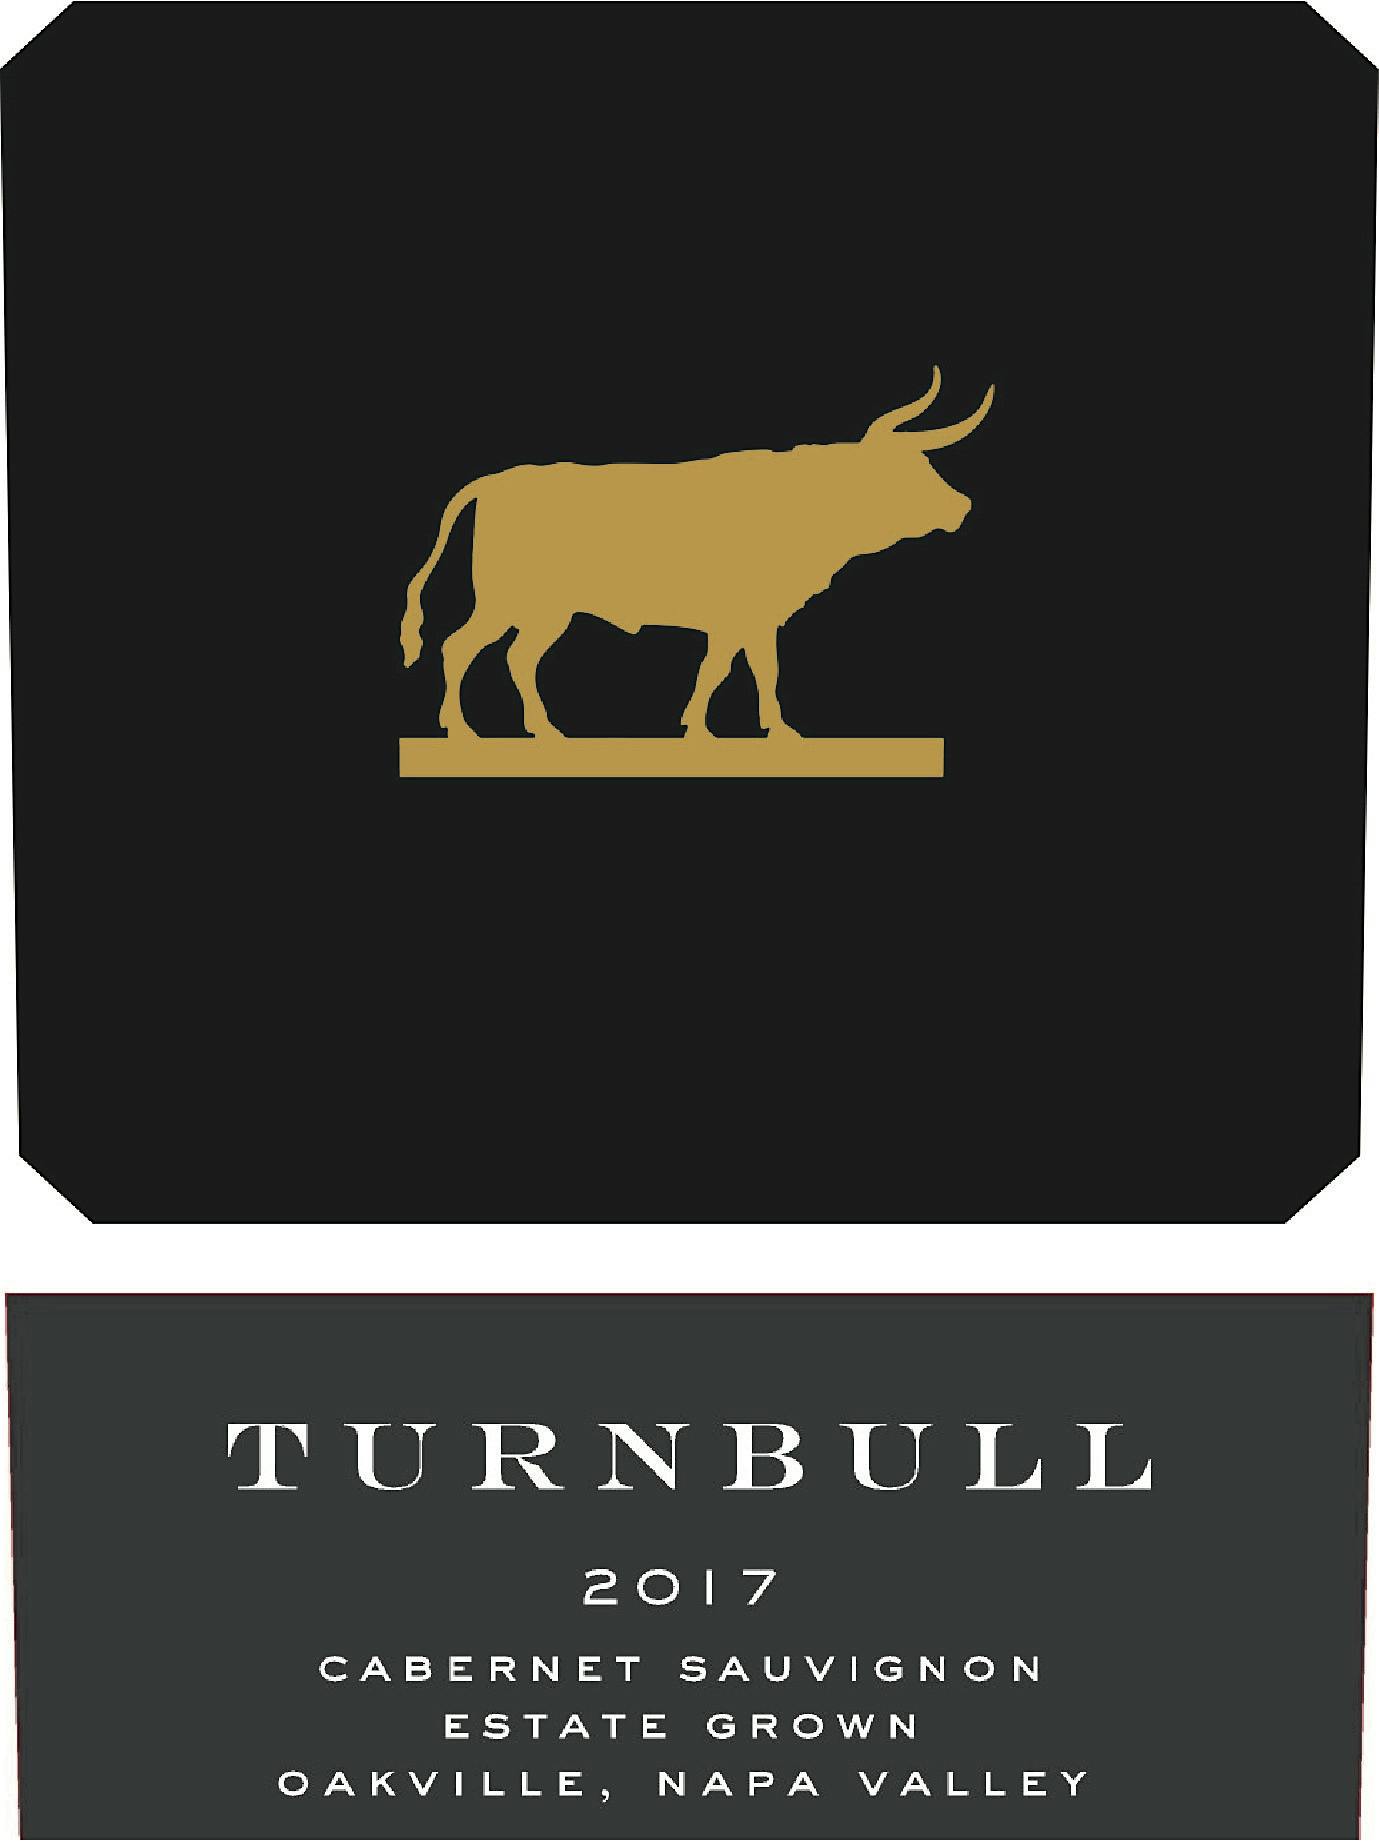 Label for Turnbull